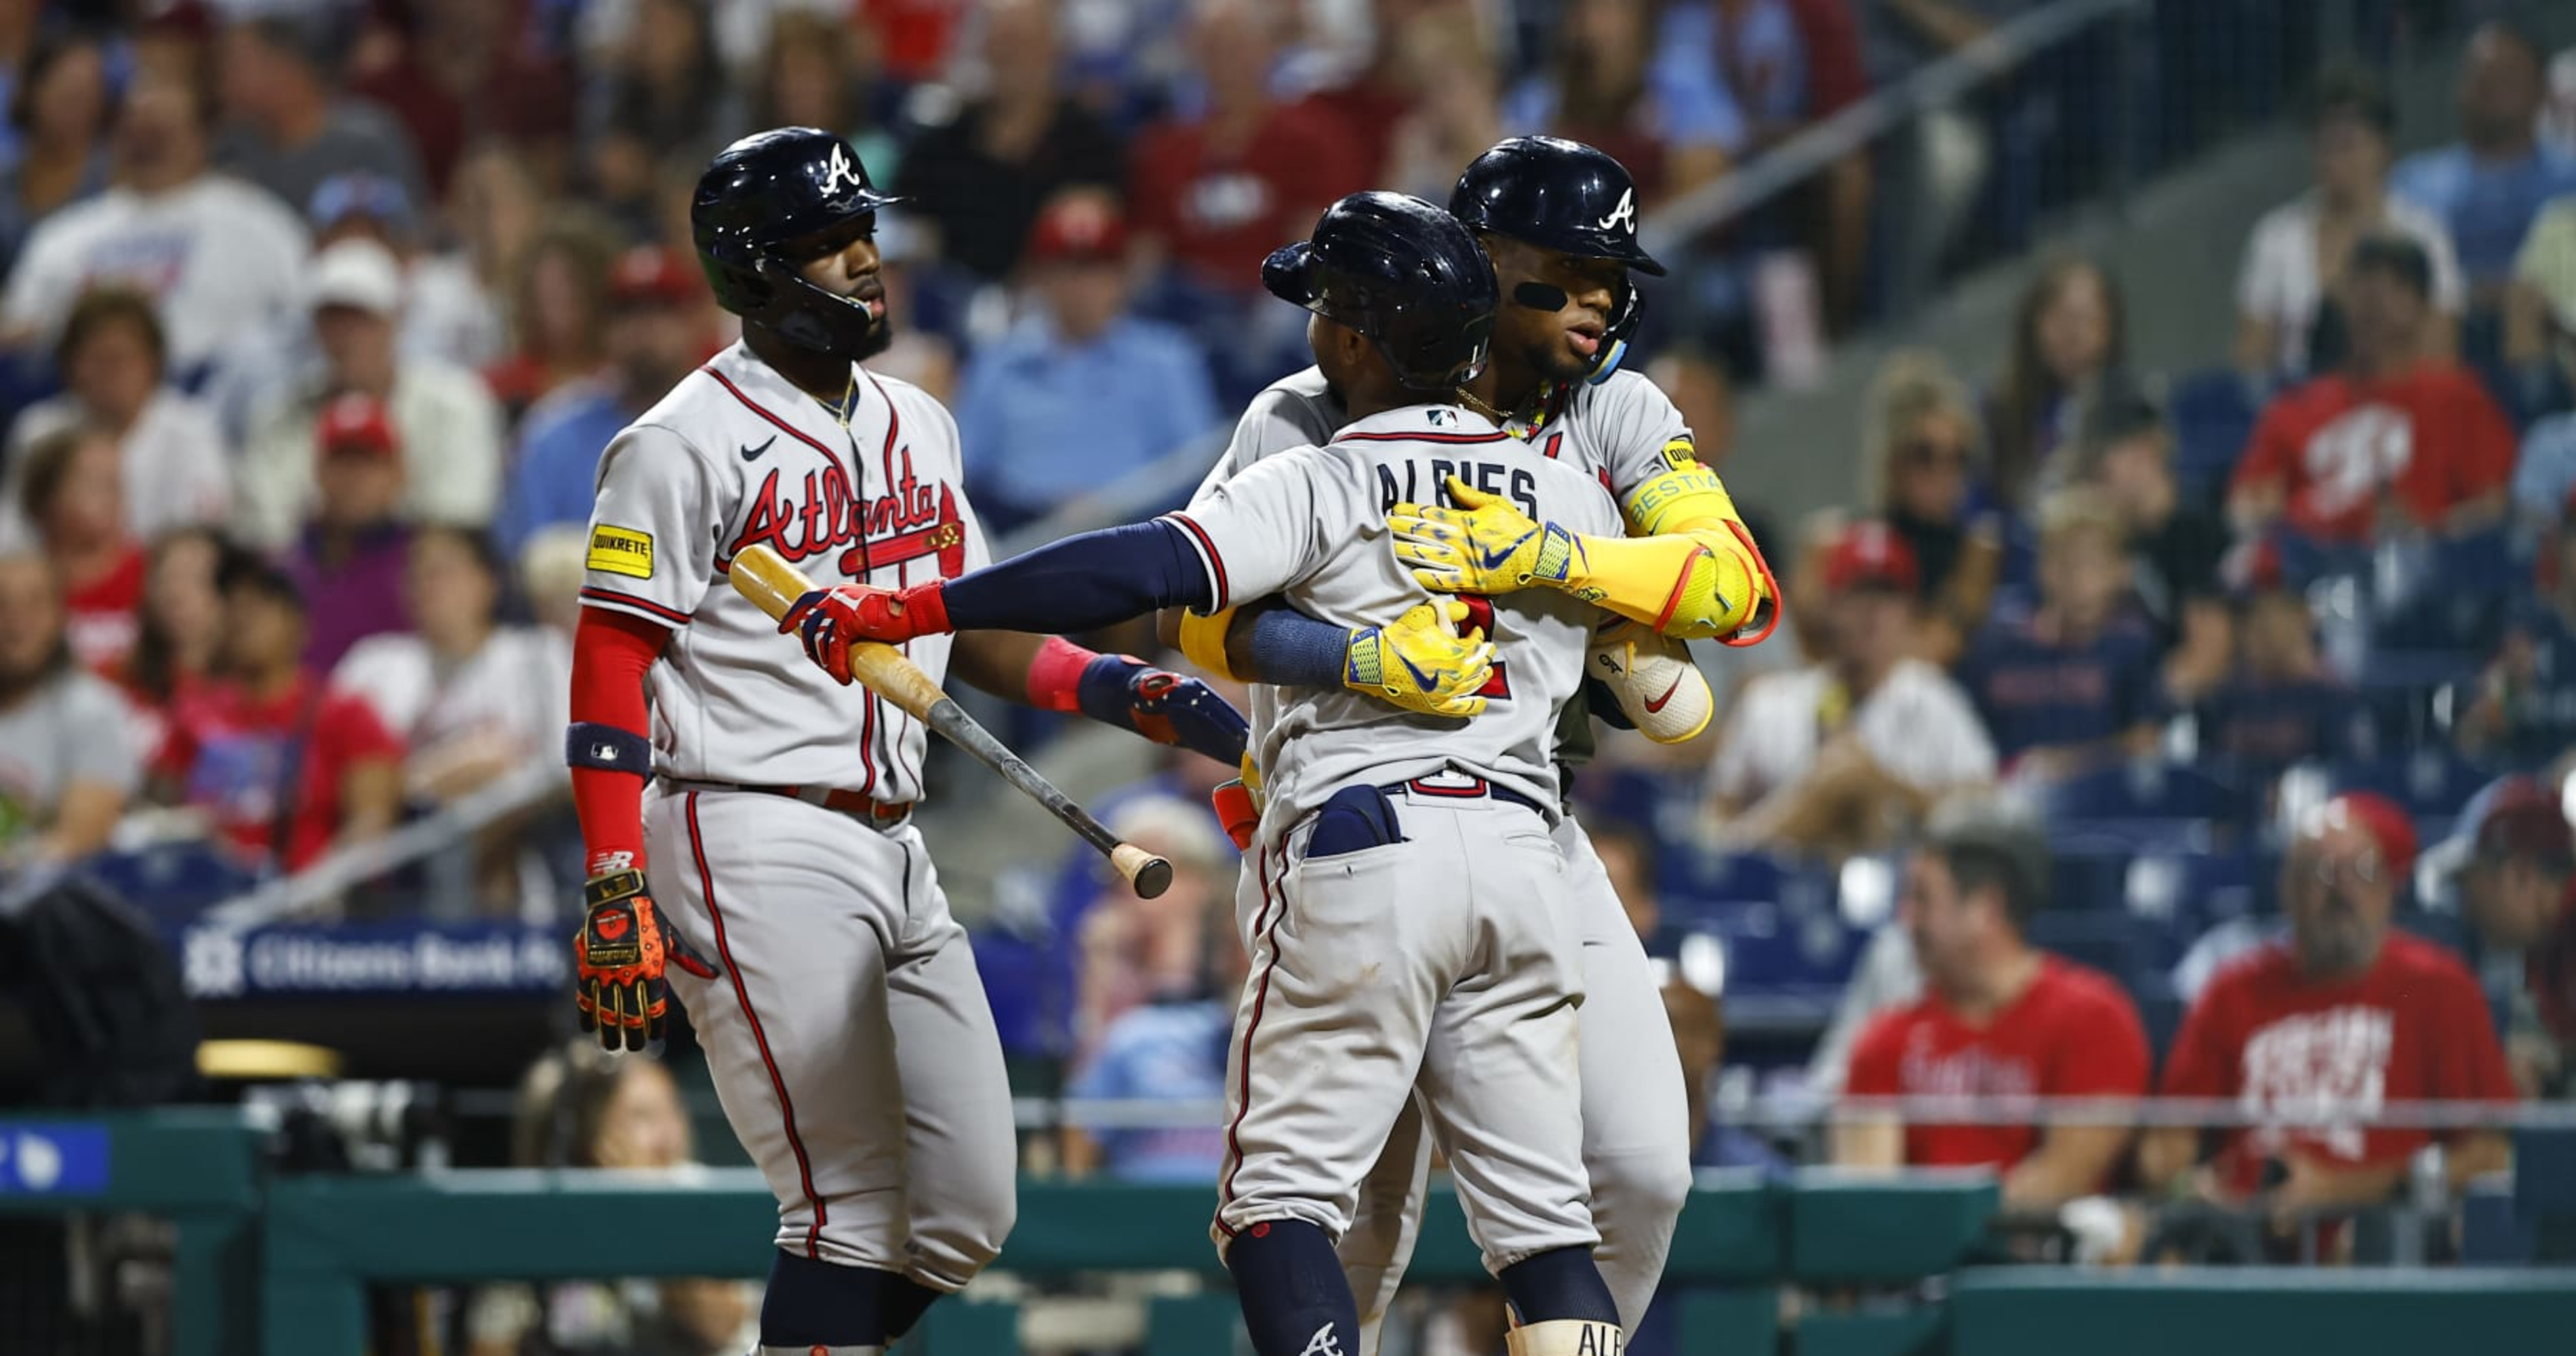 Braves News: Ronald Acuna gets the call - Battery Power